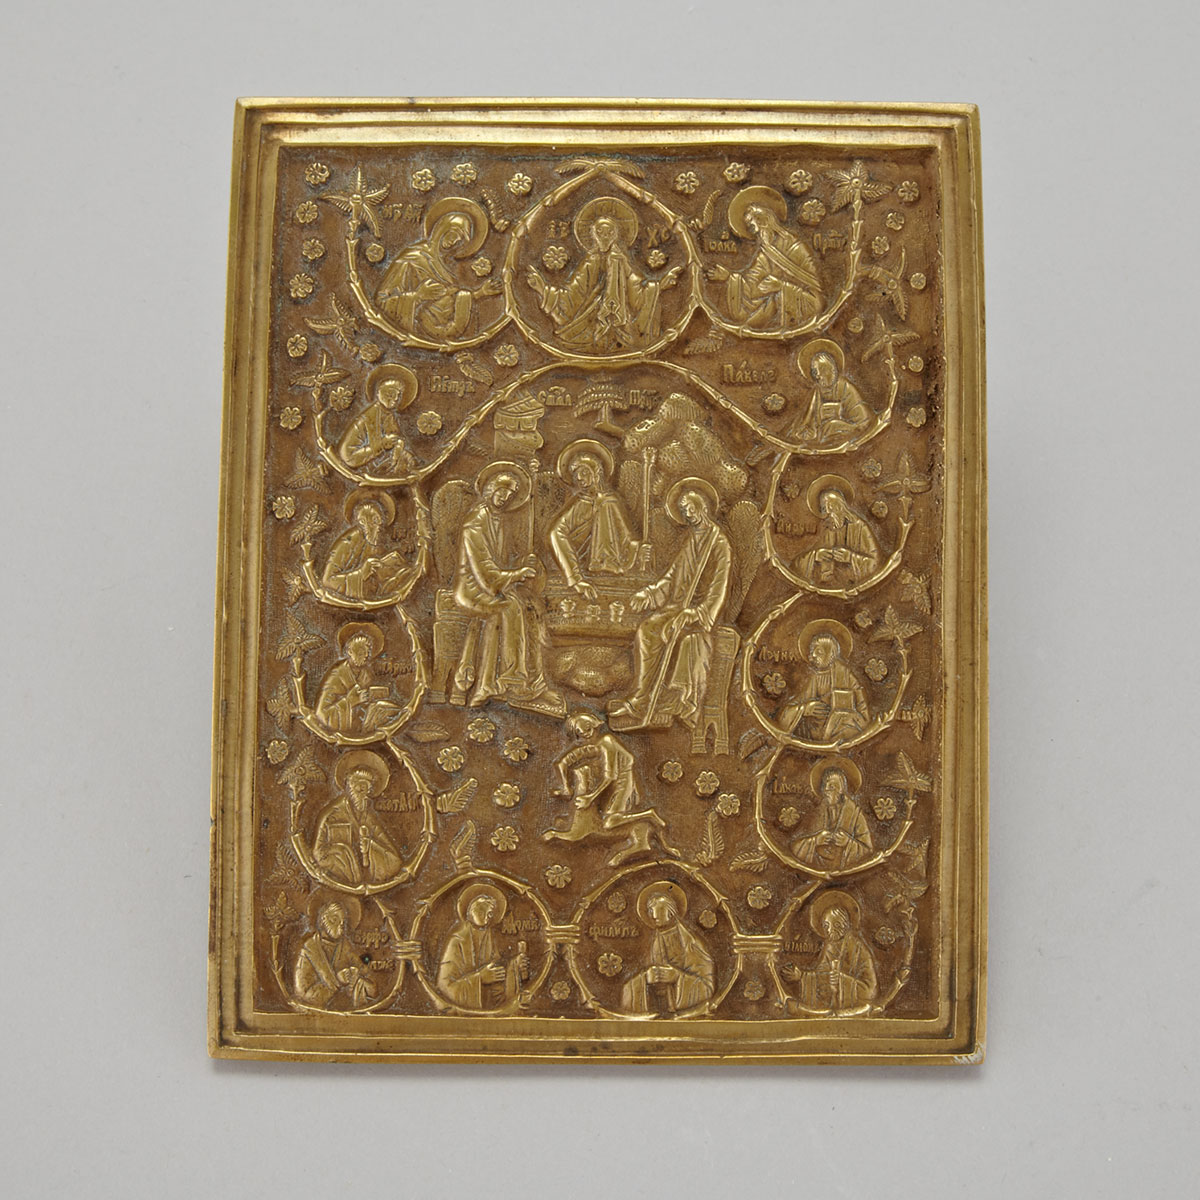 Russian Bronze Travelling Icon of the Old Testament Holy Trinity, 19th century